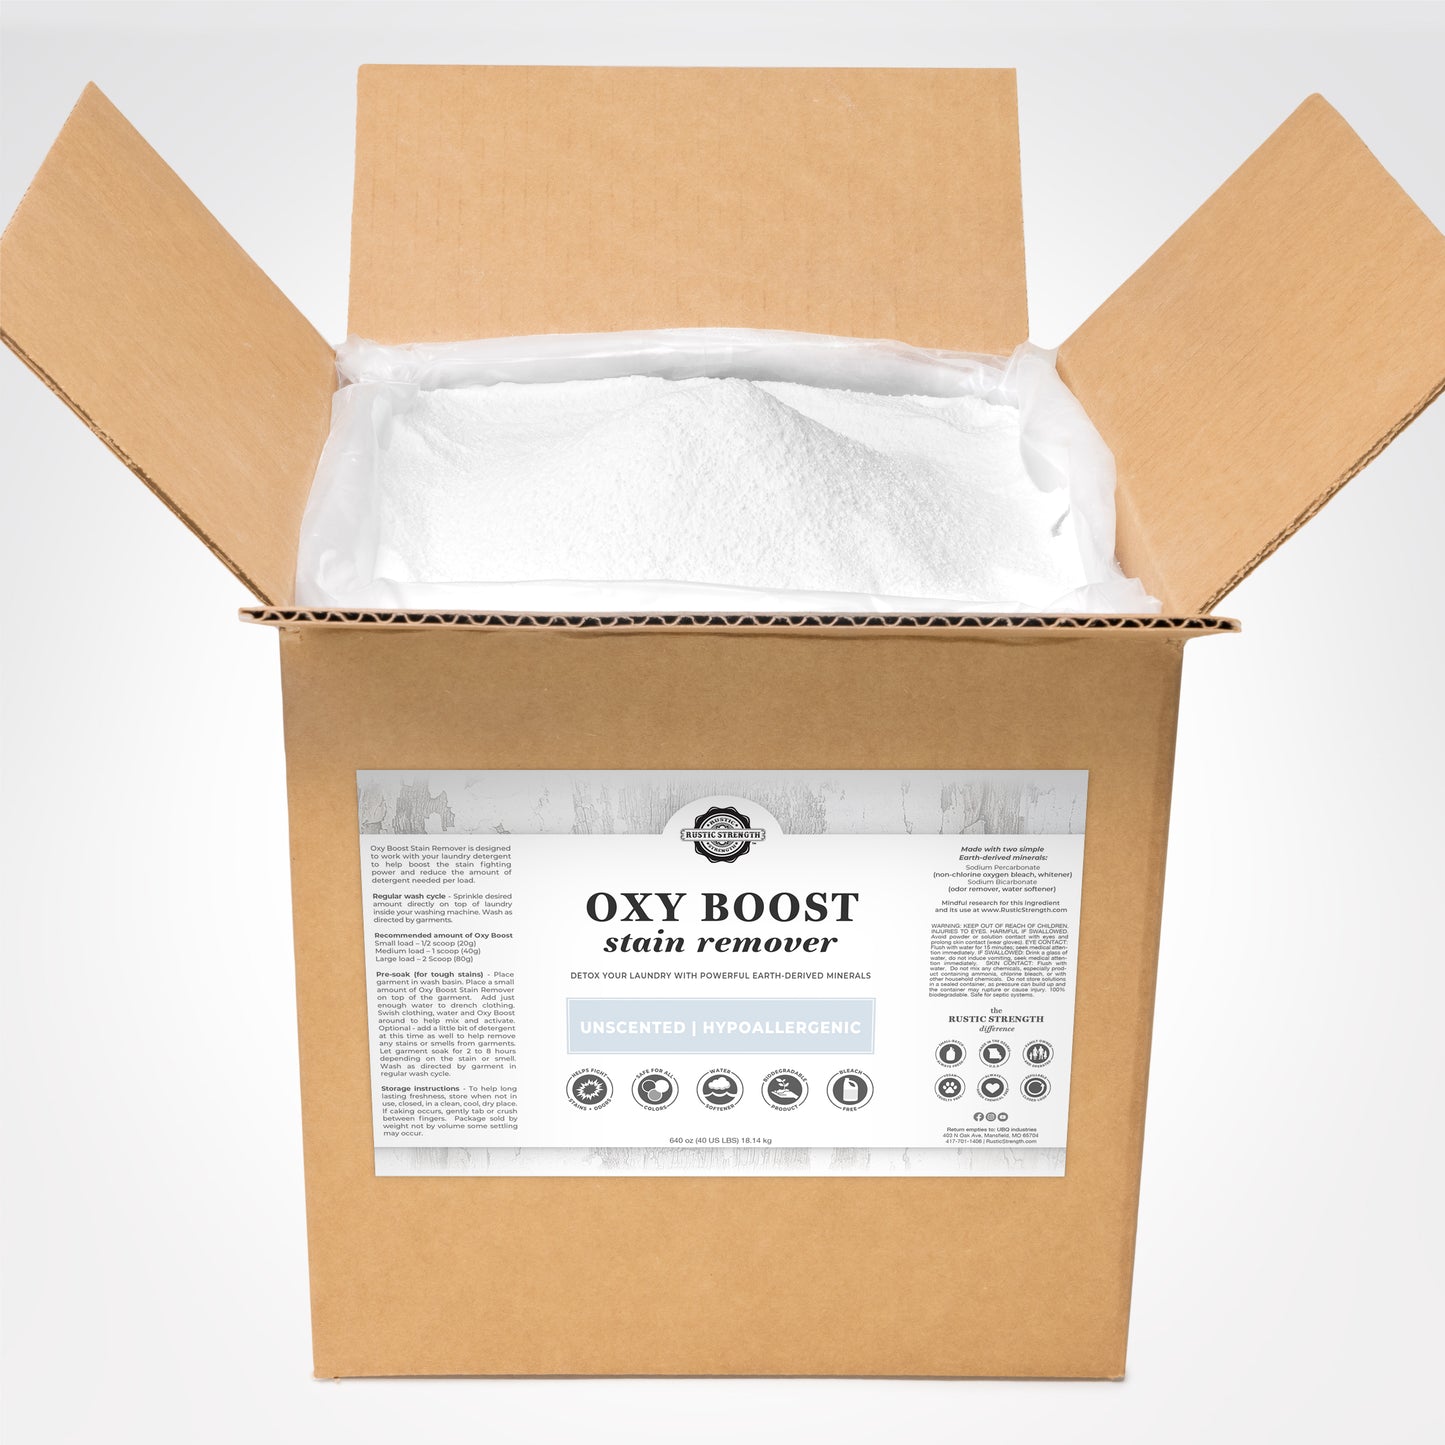 OxyBoost Stain Remover